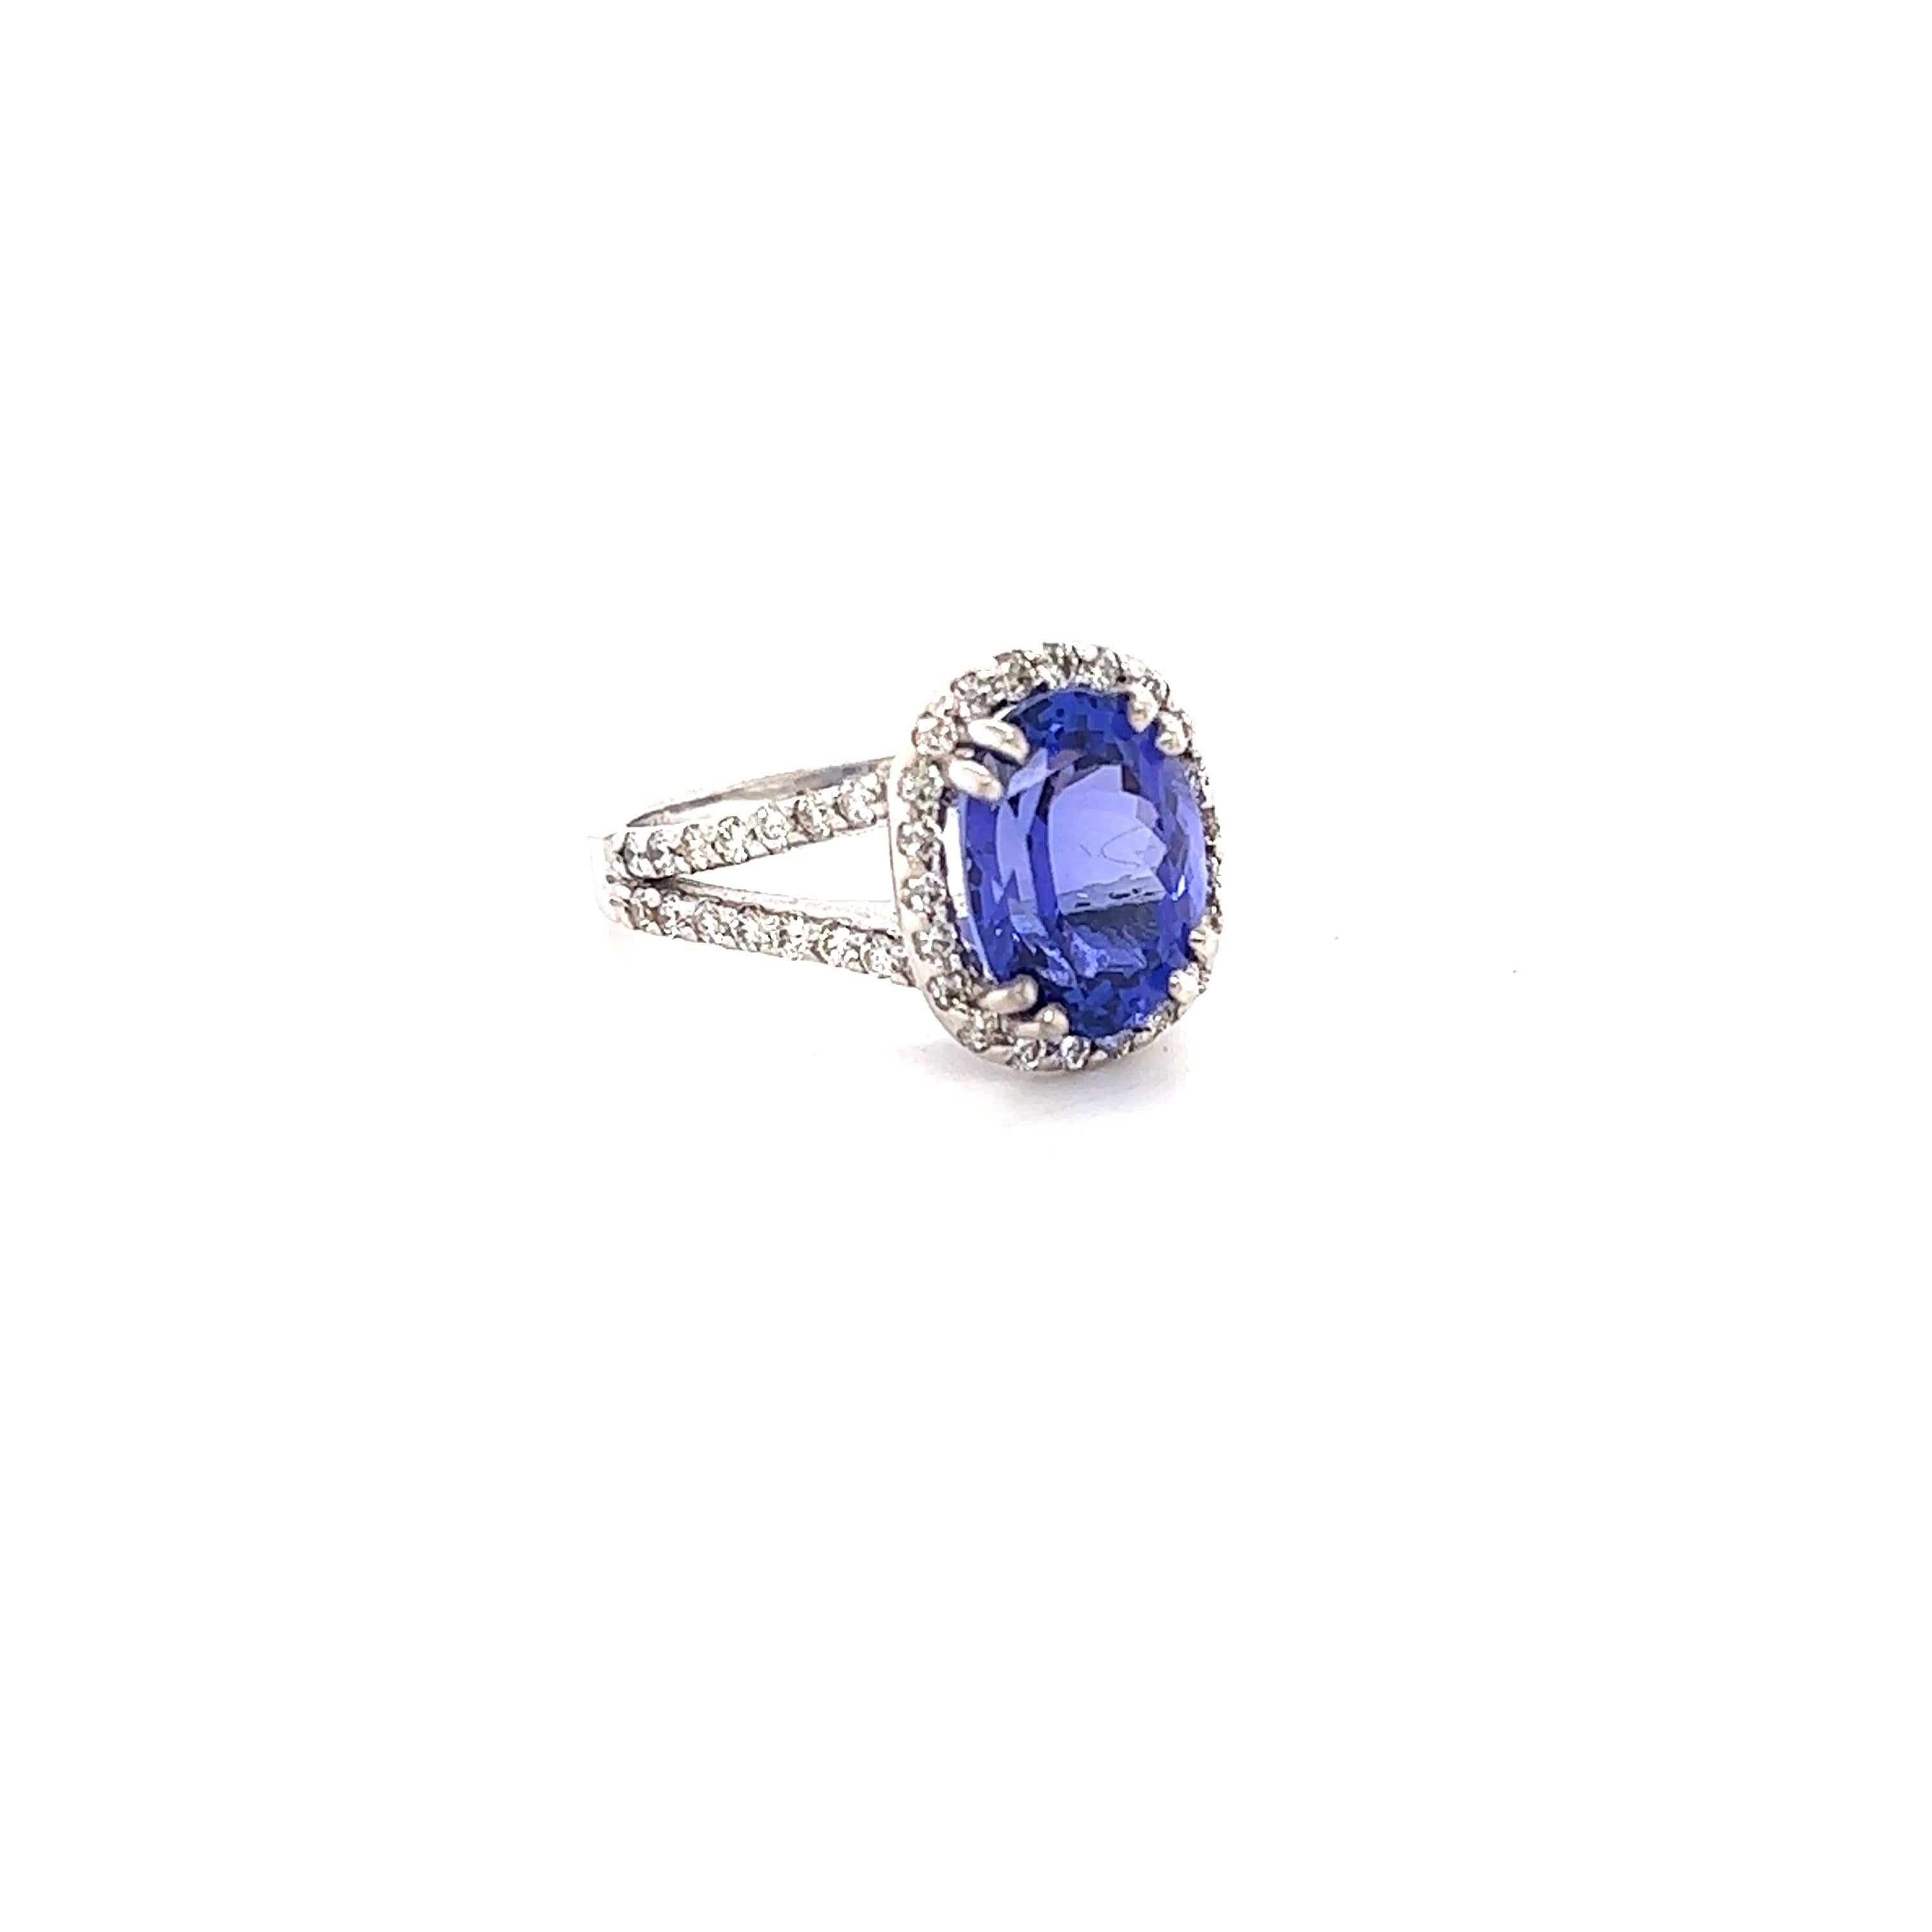 This ring has a radiant purple Oval Cut Natural Tanzanite weighing 4.27 Carats. The Tanzanite measures at 11 mm x 8 mm. It is surrounded by 66 Round Cut Diamonds that weigh 0.81 Carats. The clarity and color of the diamonds are VS-H. The total carat